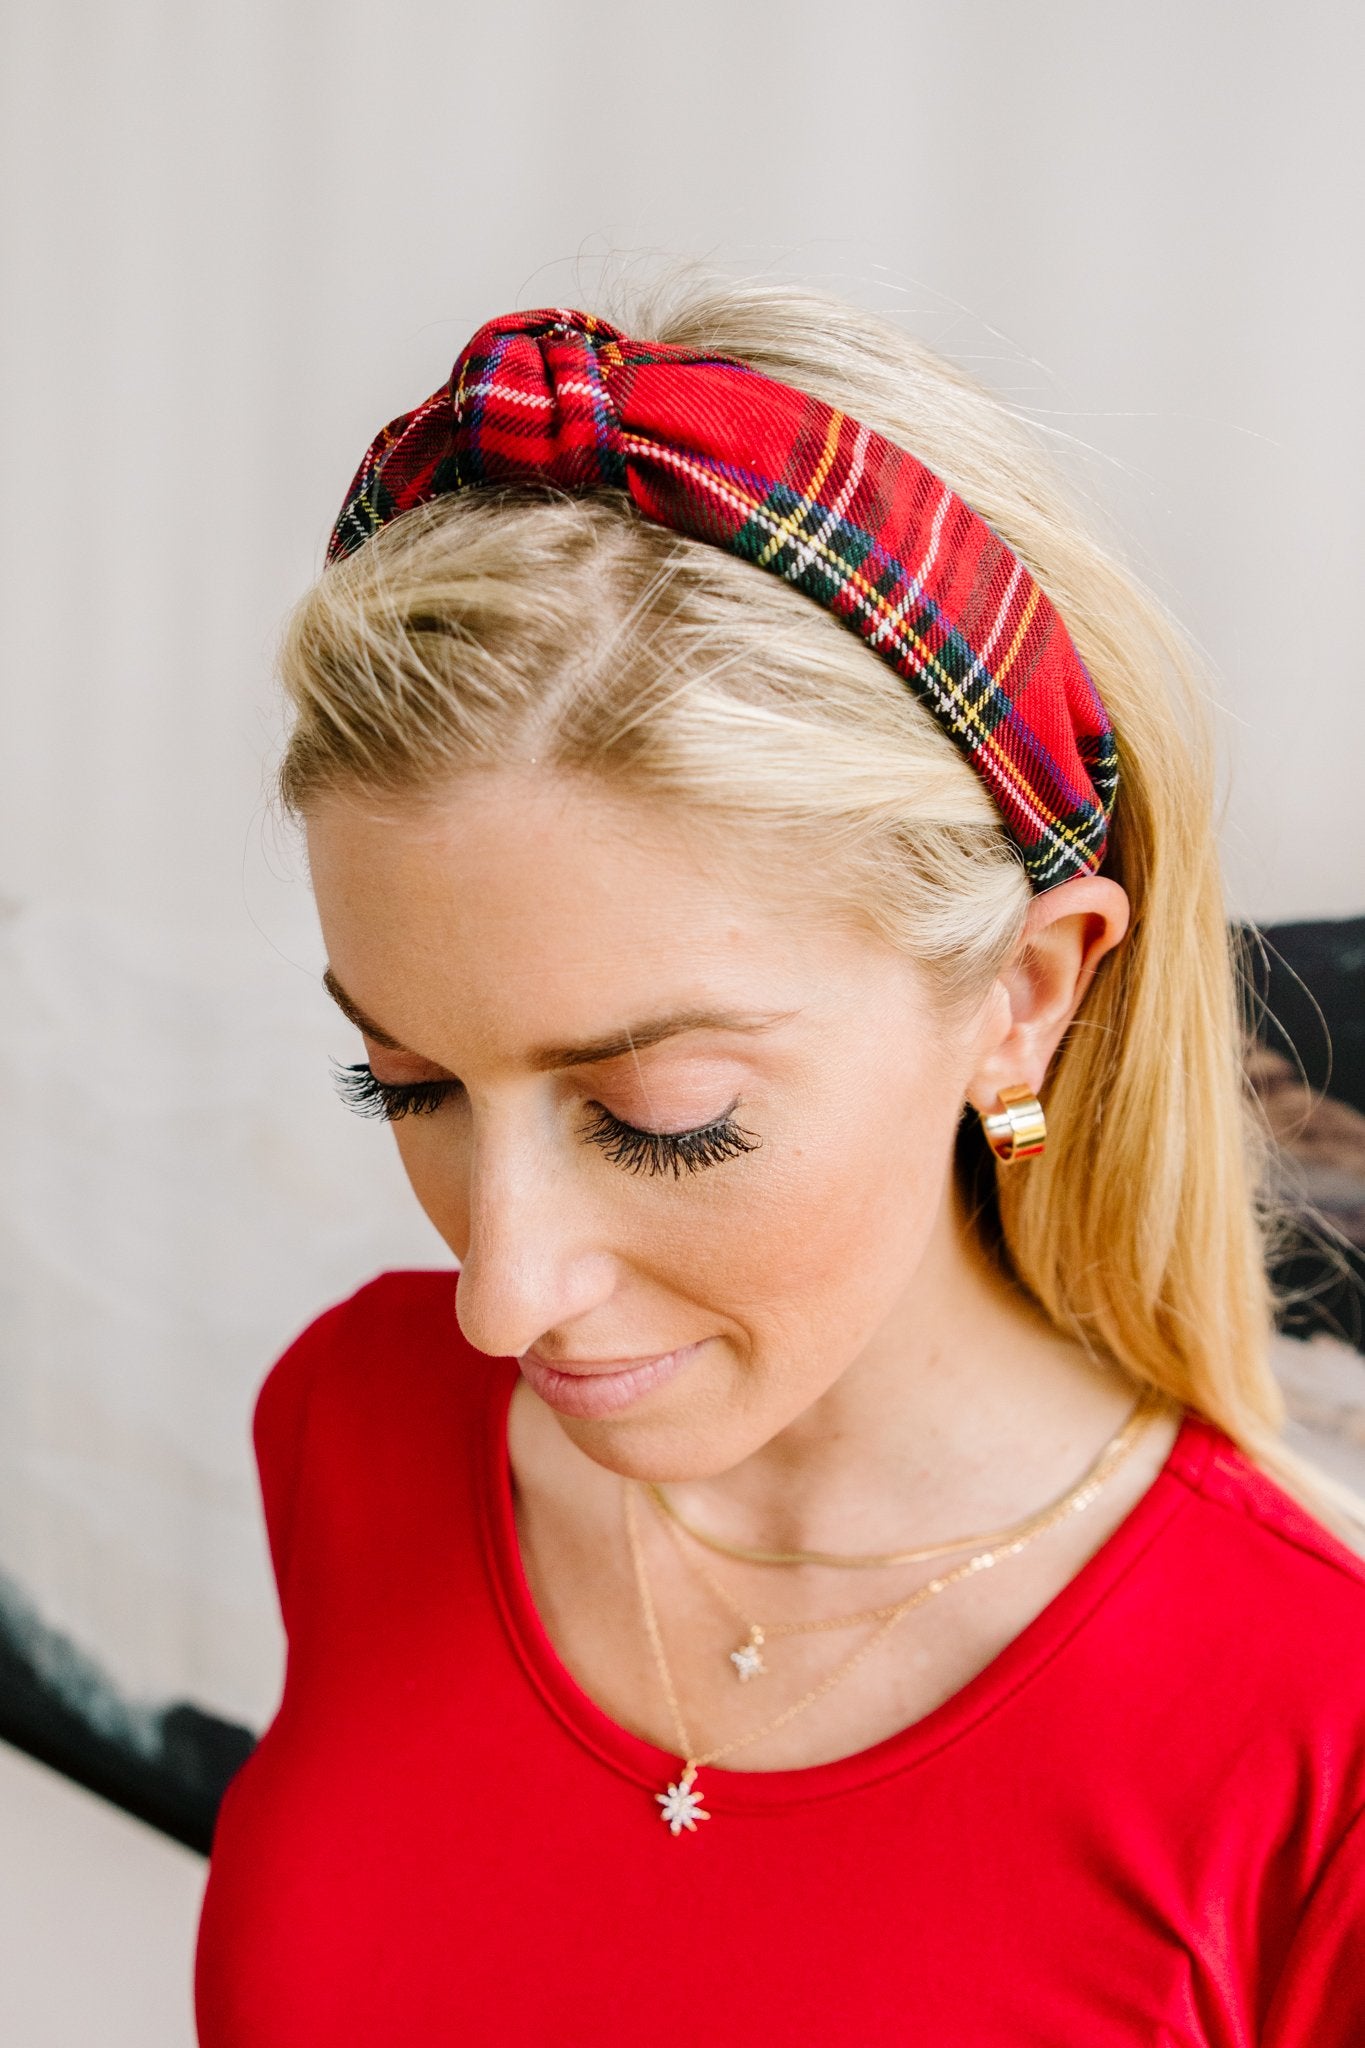 Plaid Top Knot Headband in Red